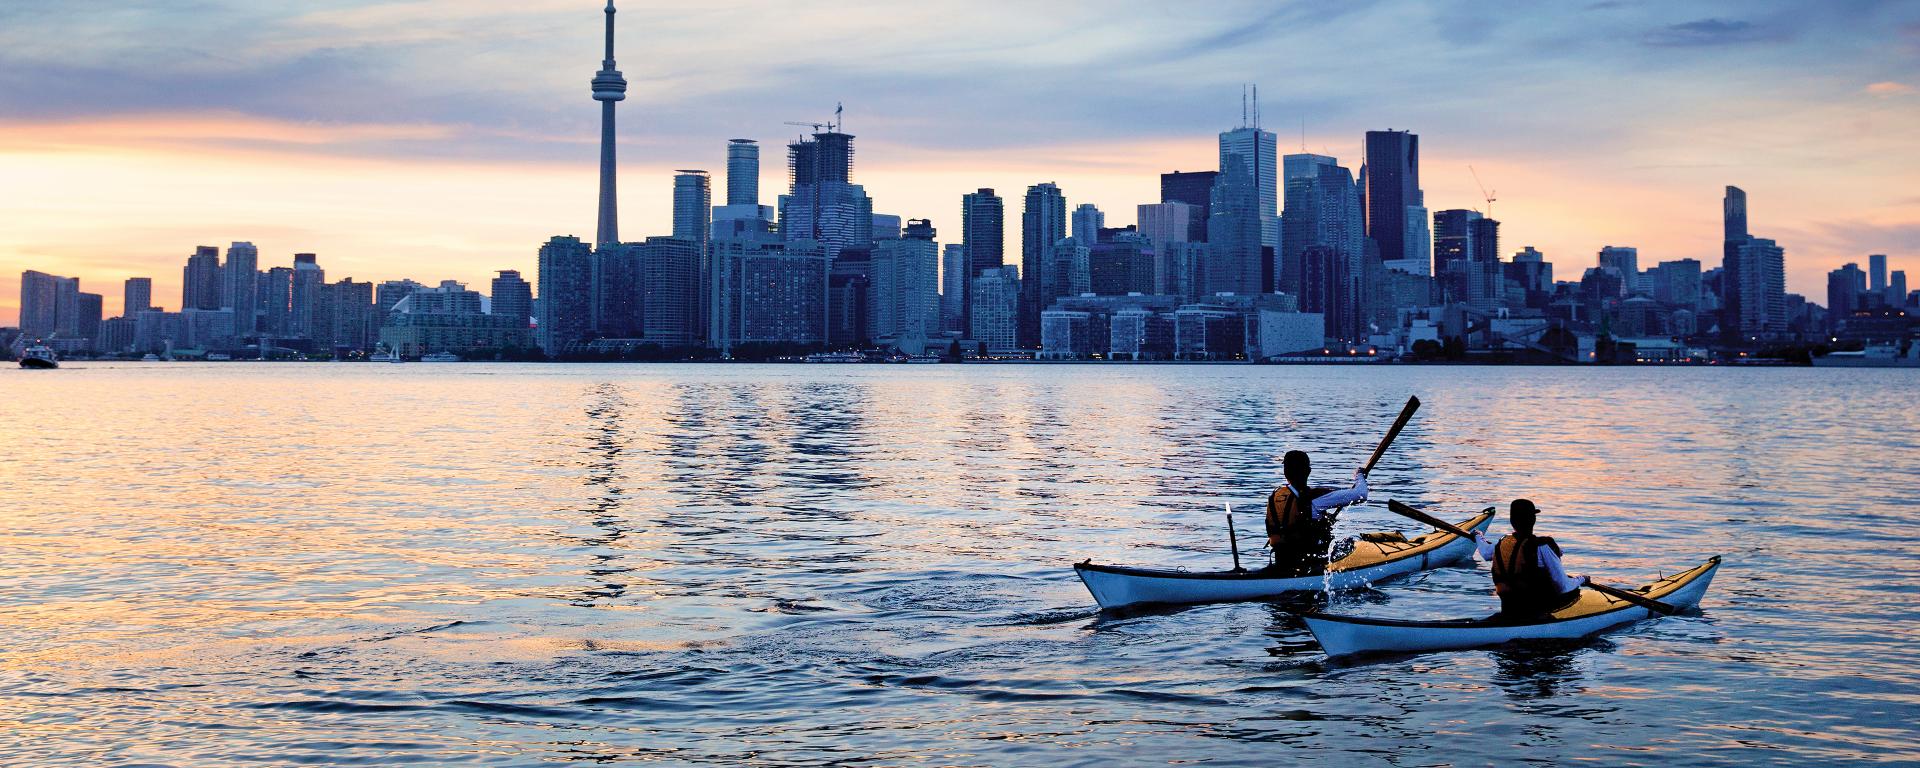 Two people are paddling in kayaks in the city skyline